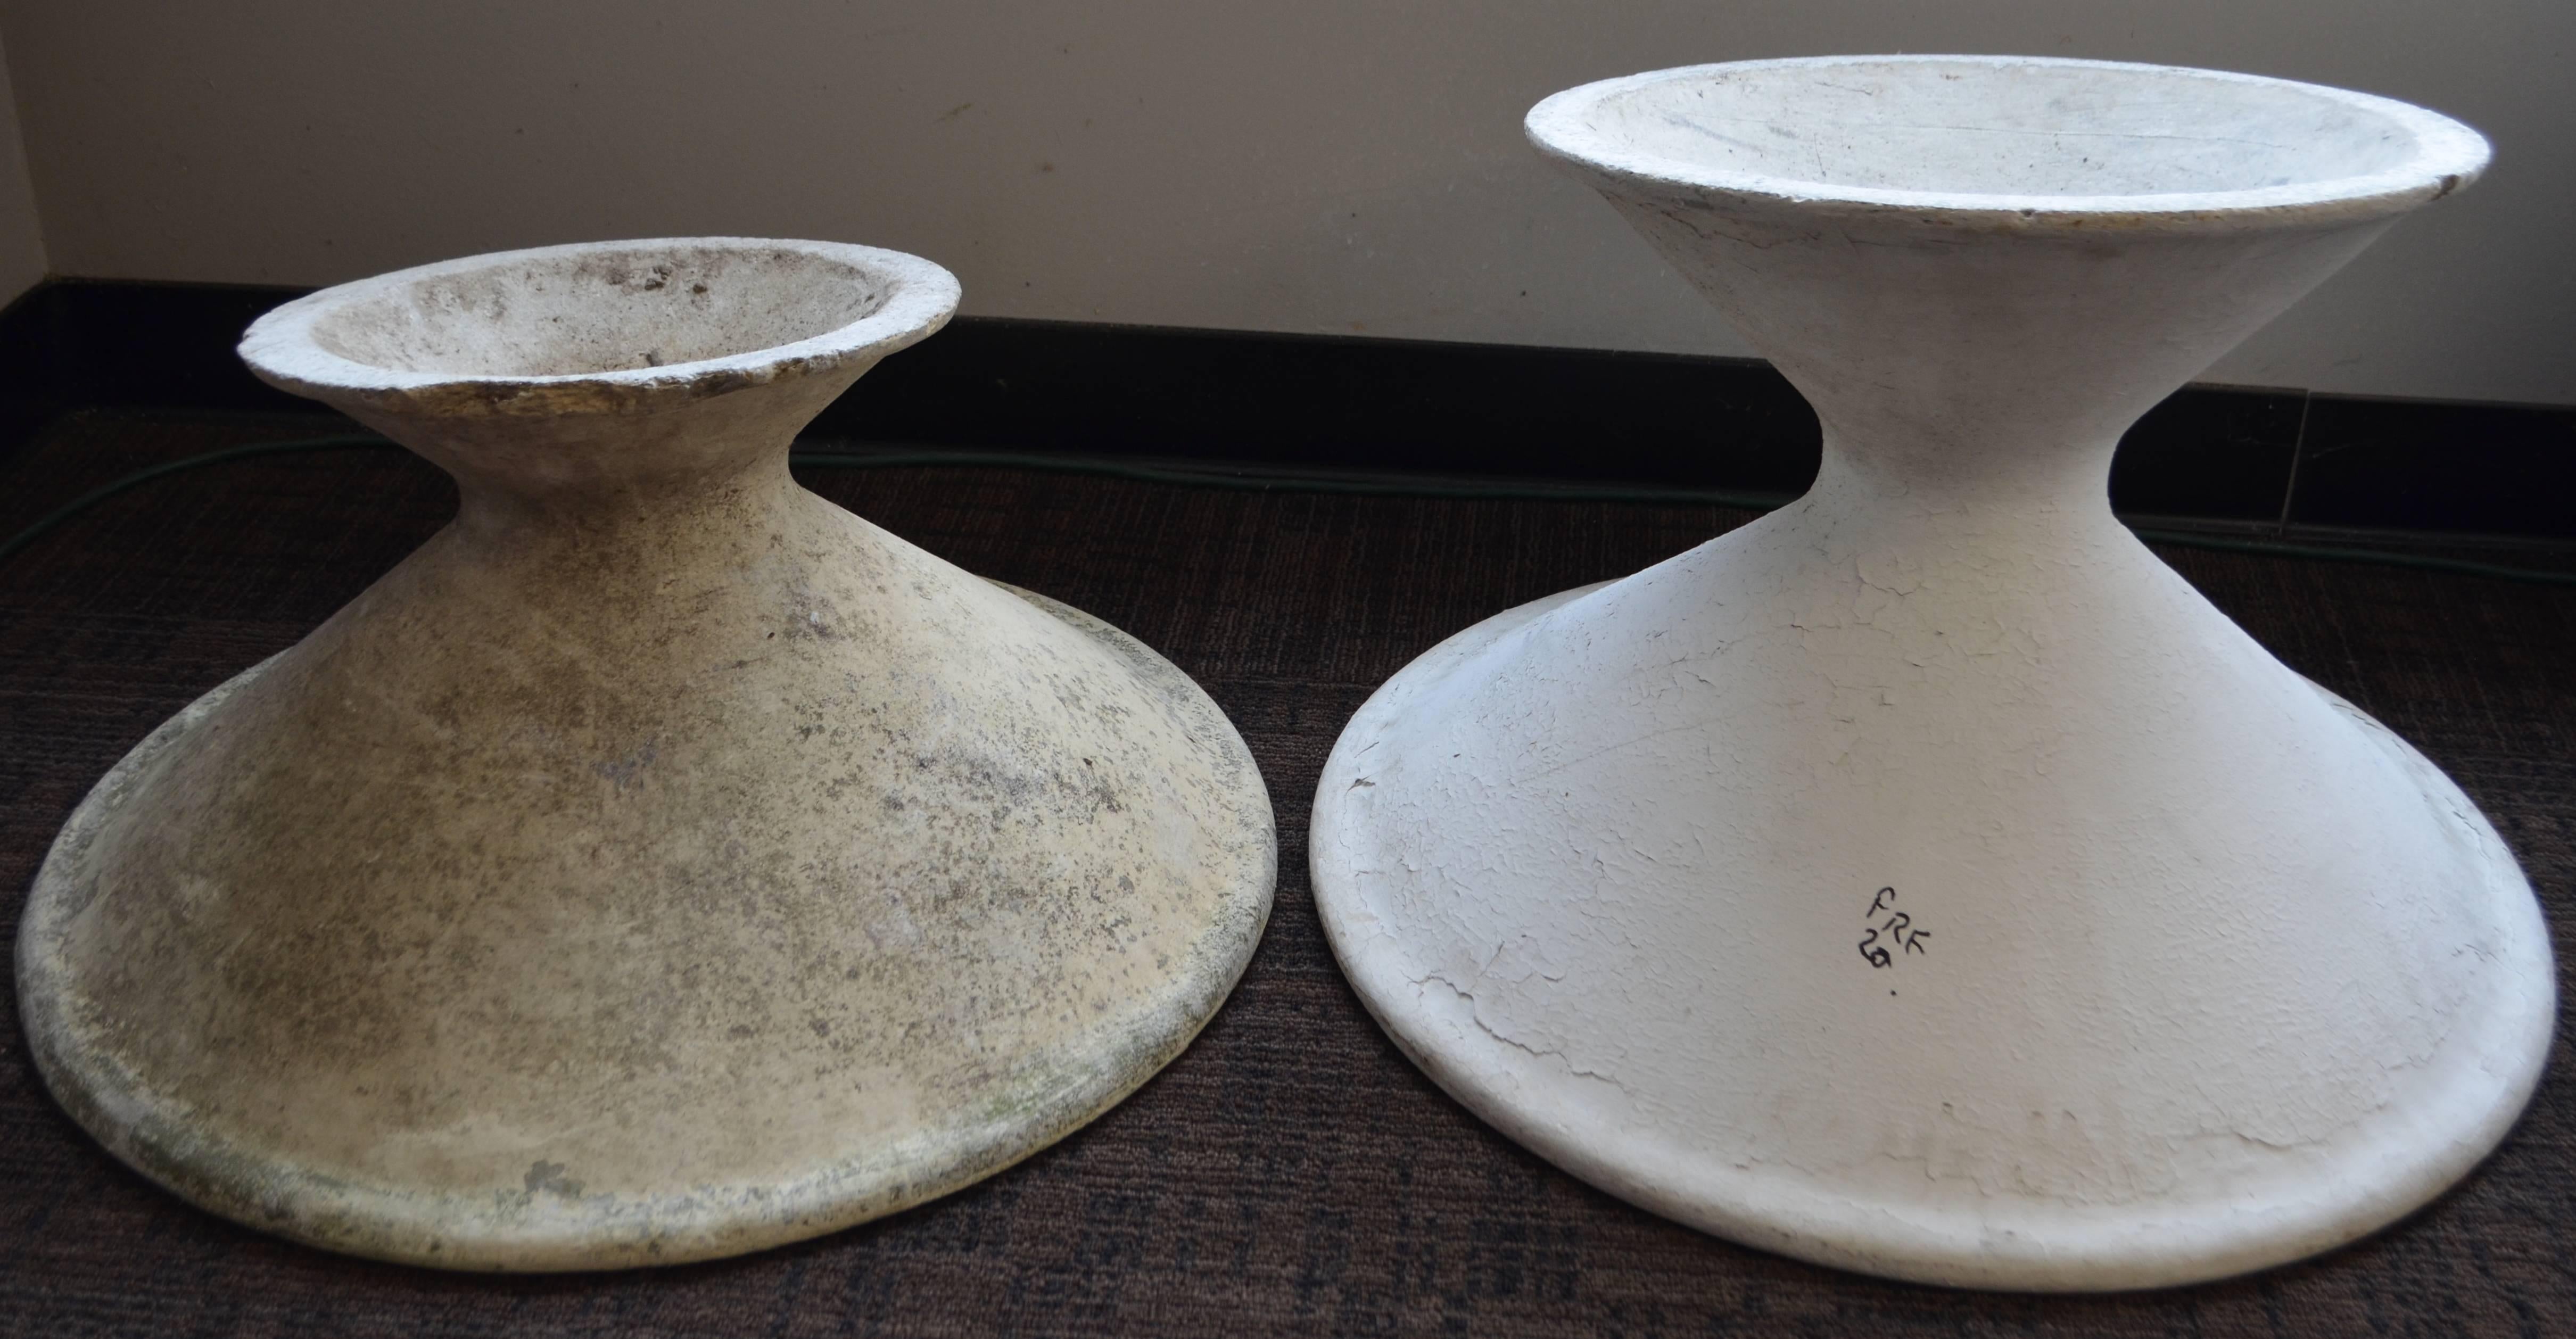 Garden Planters of Saucer Formed Stone by Willy Guhl, Offered as a Pair 1